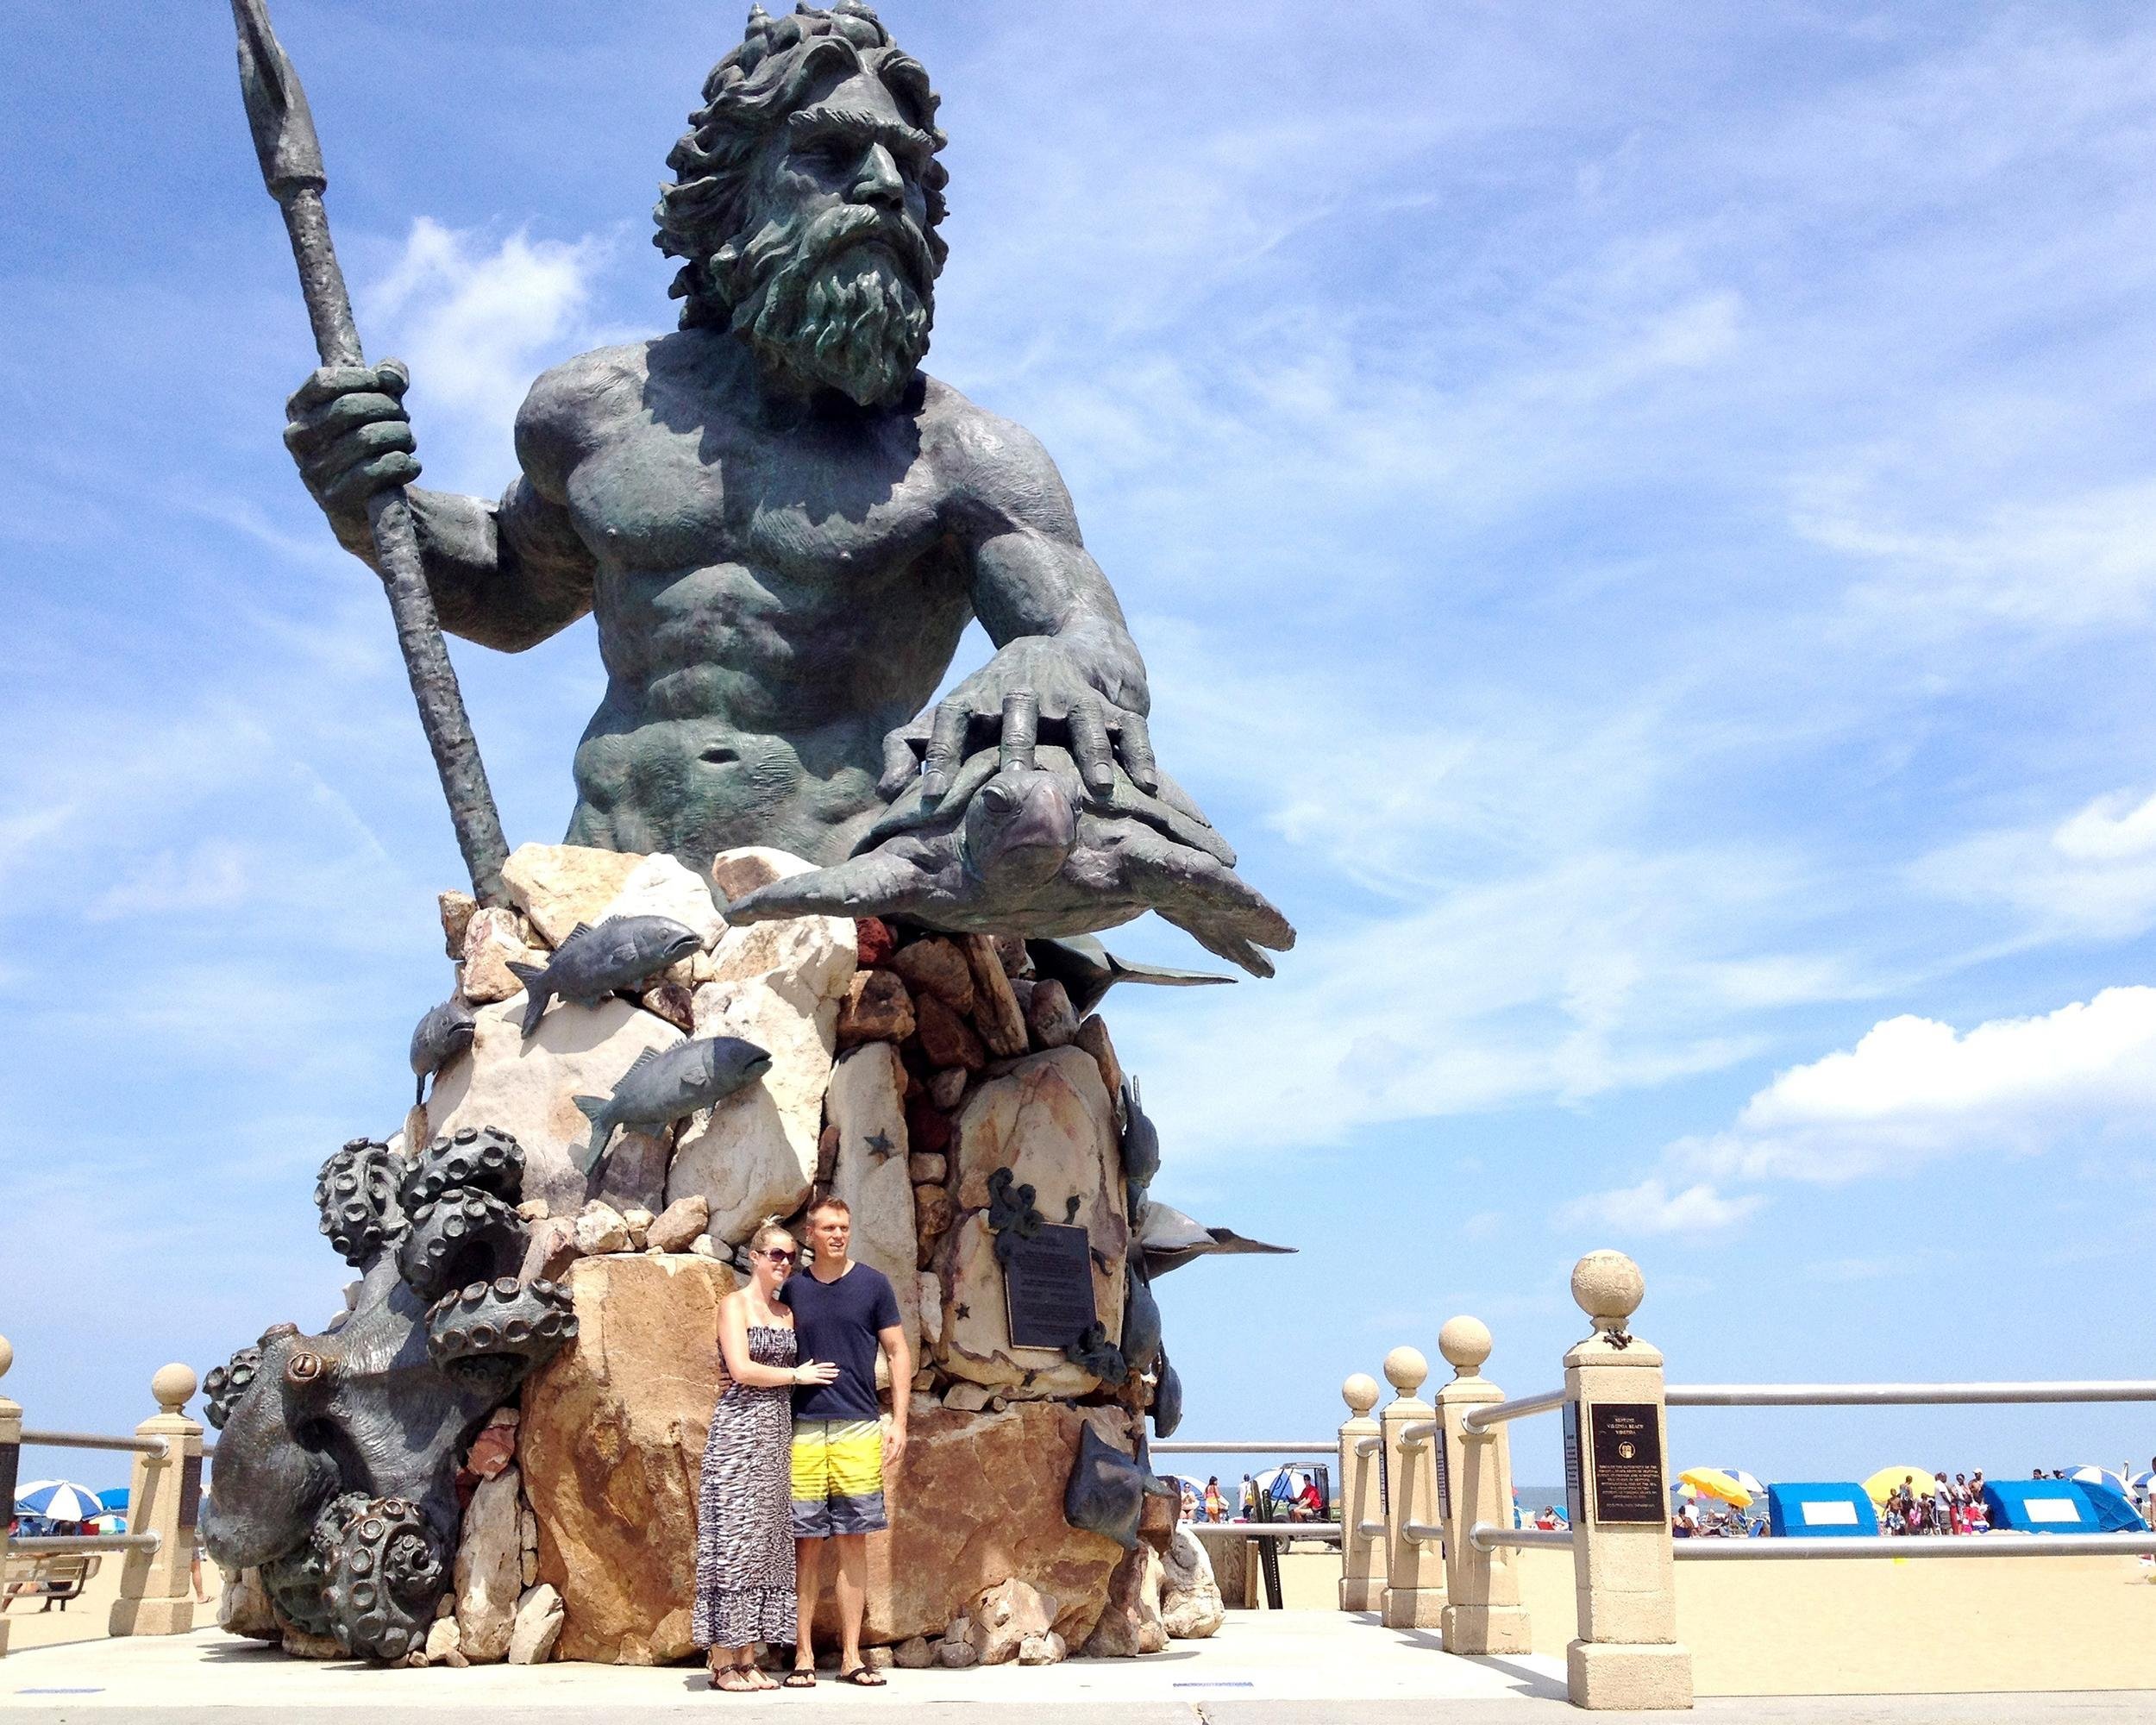 <p>With the beach, classic cars, and giant statues of the Roman sea god Neptune, Virginia Beach practically begs visitors to throw on a little sunscreen and smile wide for selfies. The backdrops are so varied, you could fool followers into thinking you're in a different place in each photo.</p>